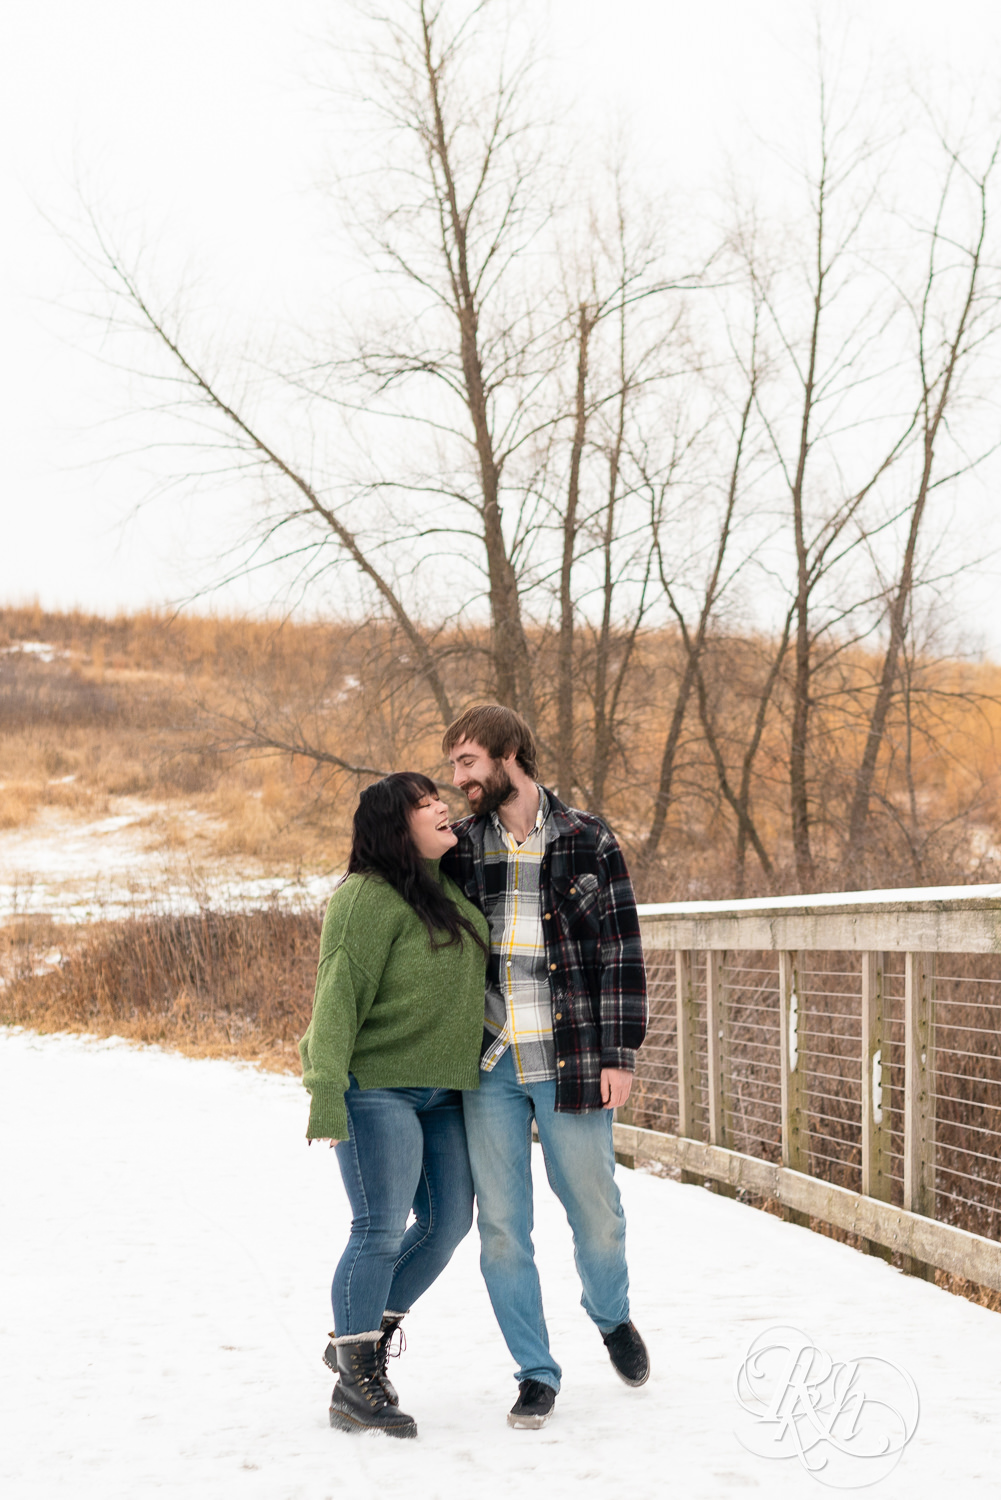 Man in flannel and woman in green sweater and jeans laugh and walk across snowy bridge at Lebanon Hills in Eagan, Minnesota.